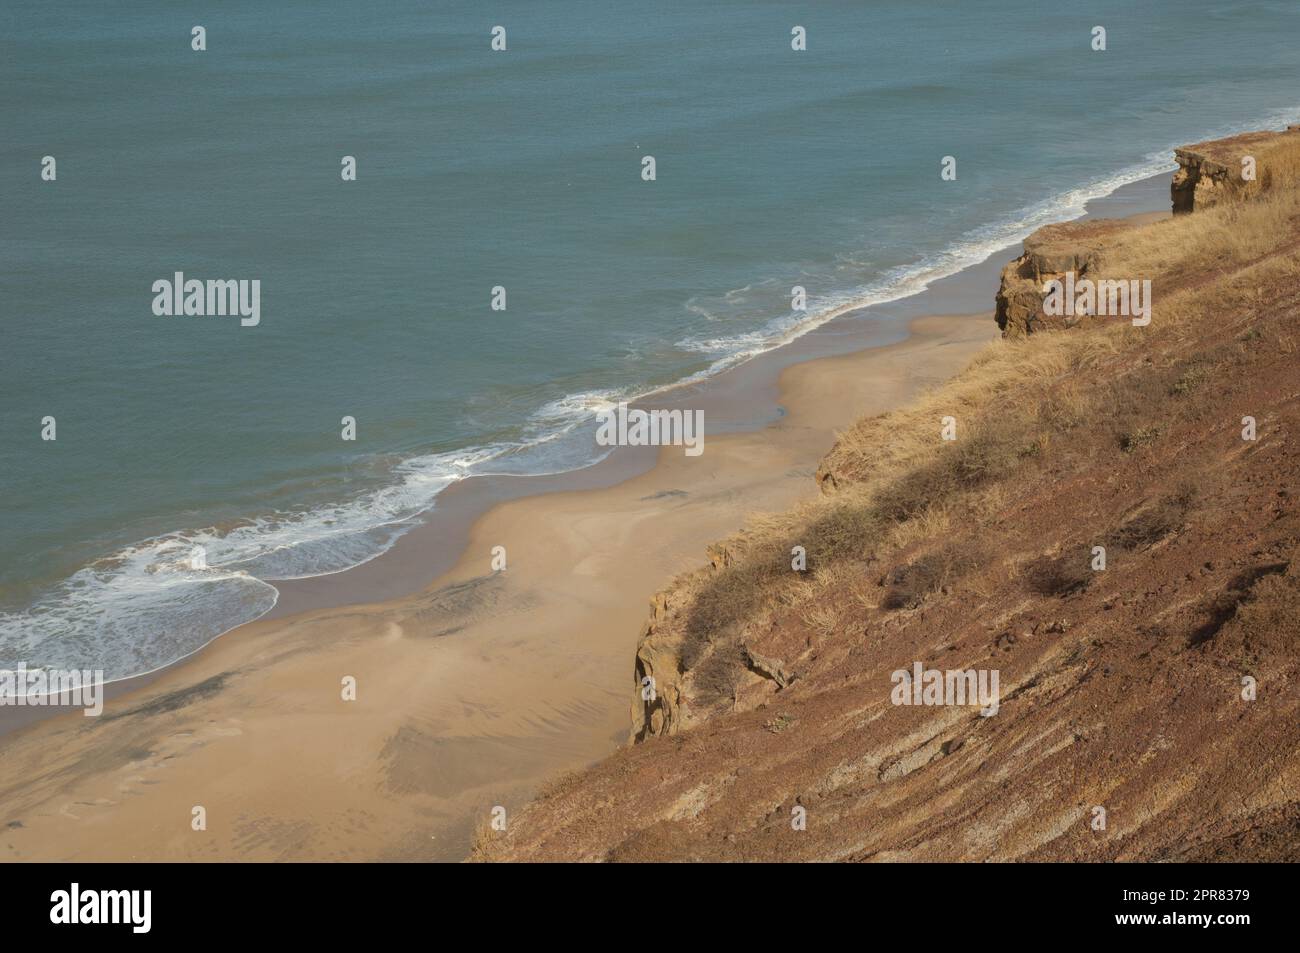 Sea cliff and beach in the Natural Reserve of Popenguine. Stock Photo